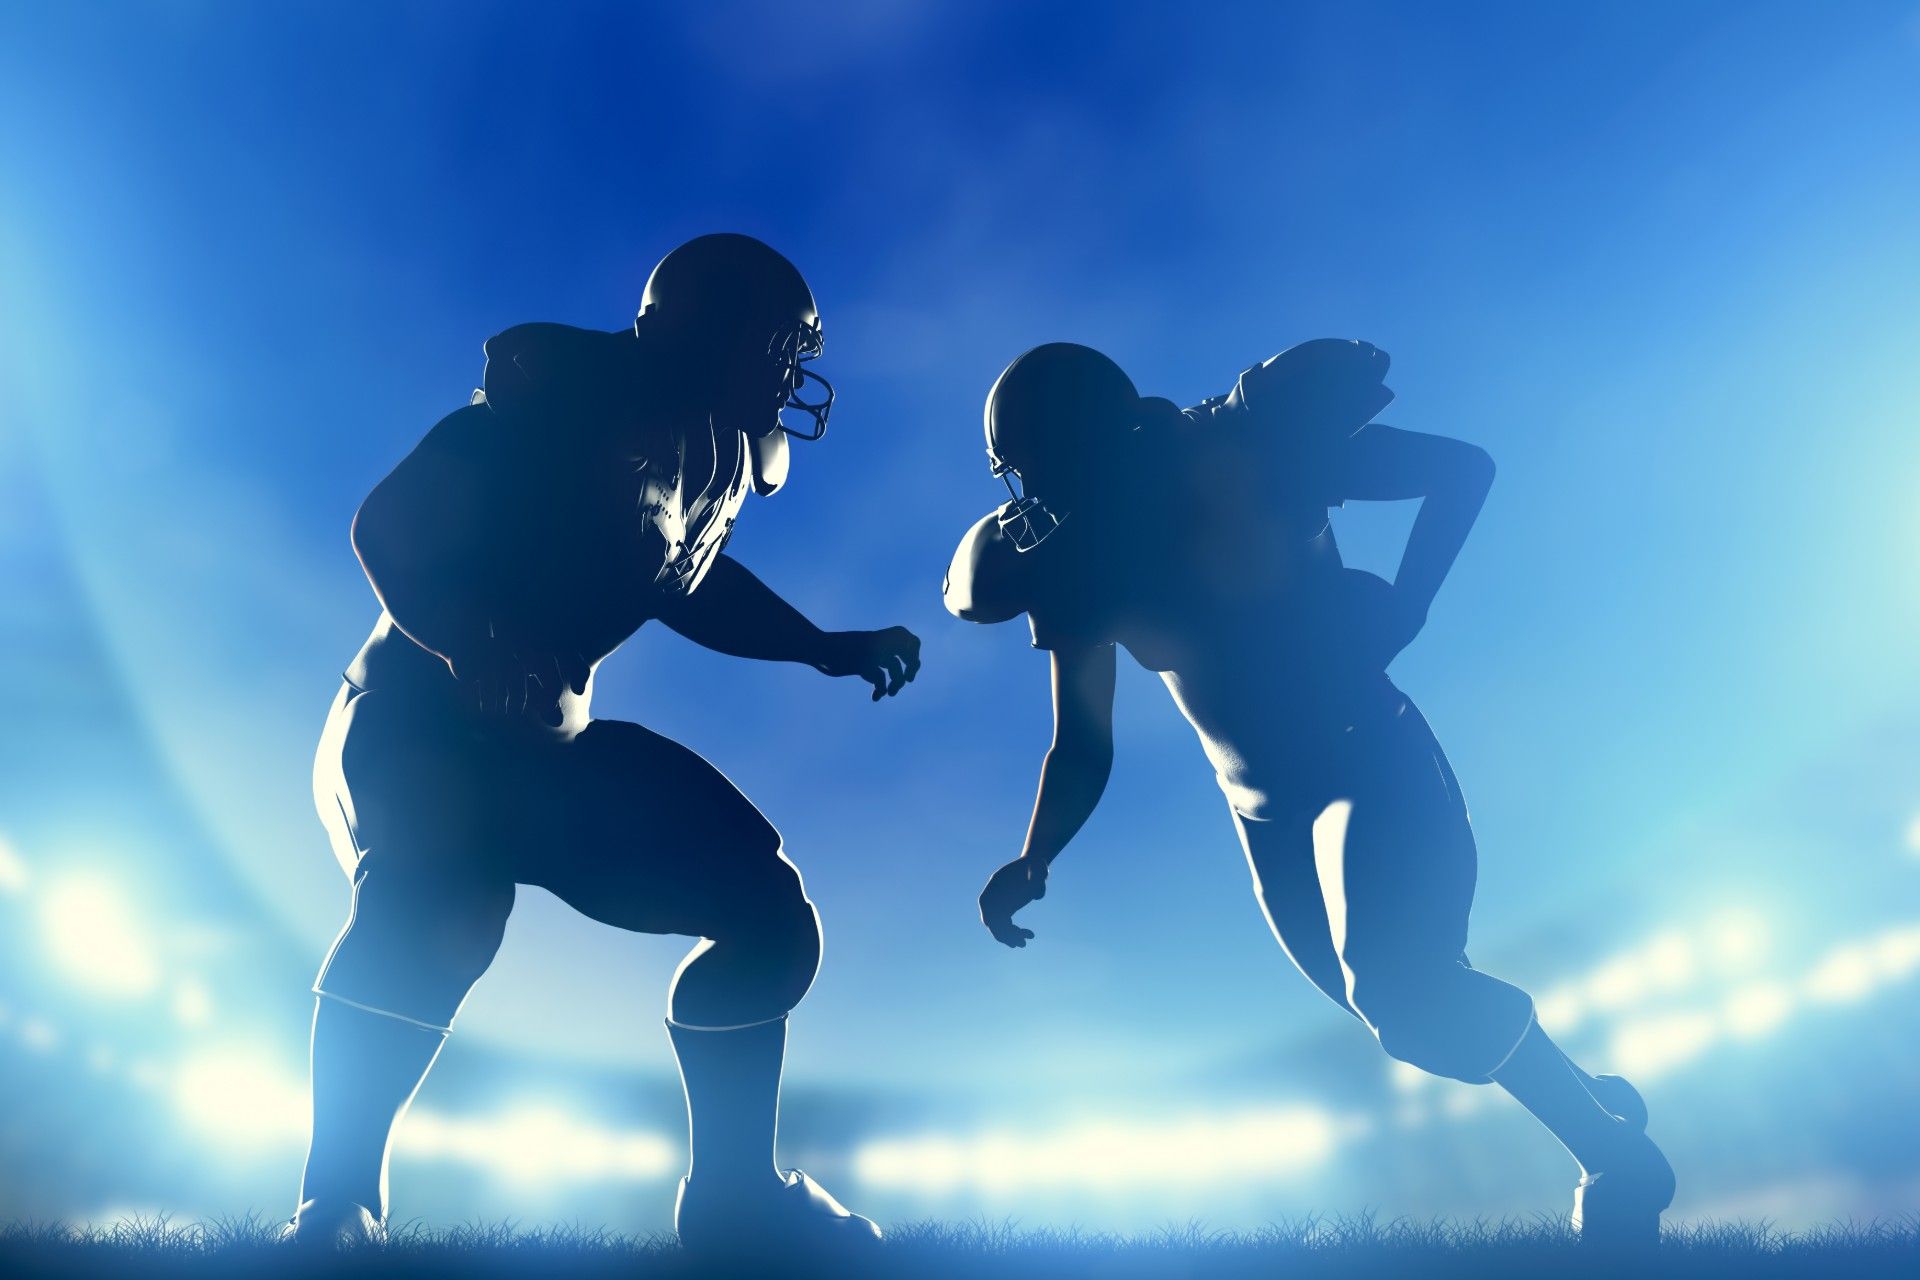 Two football players on the field are backlit with blue light - NFL players